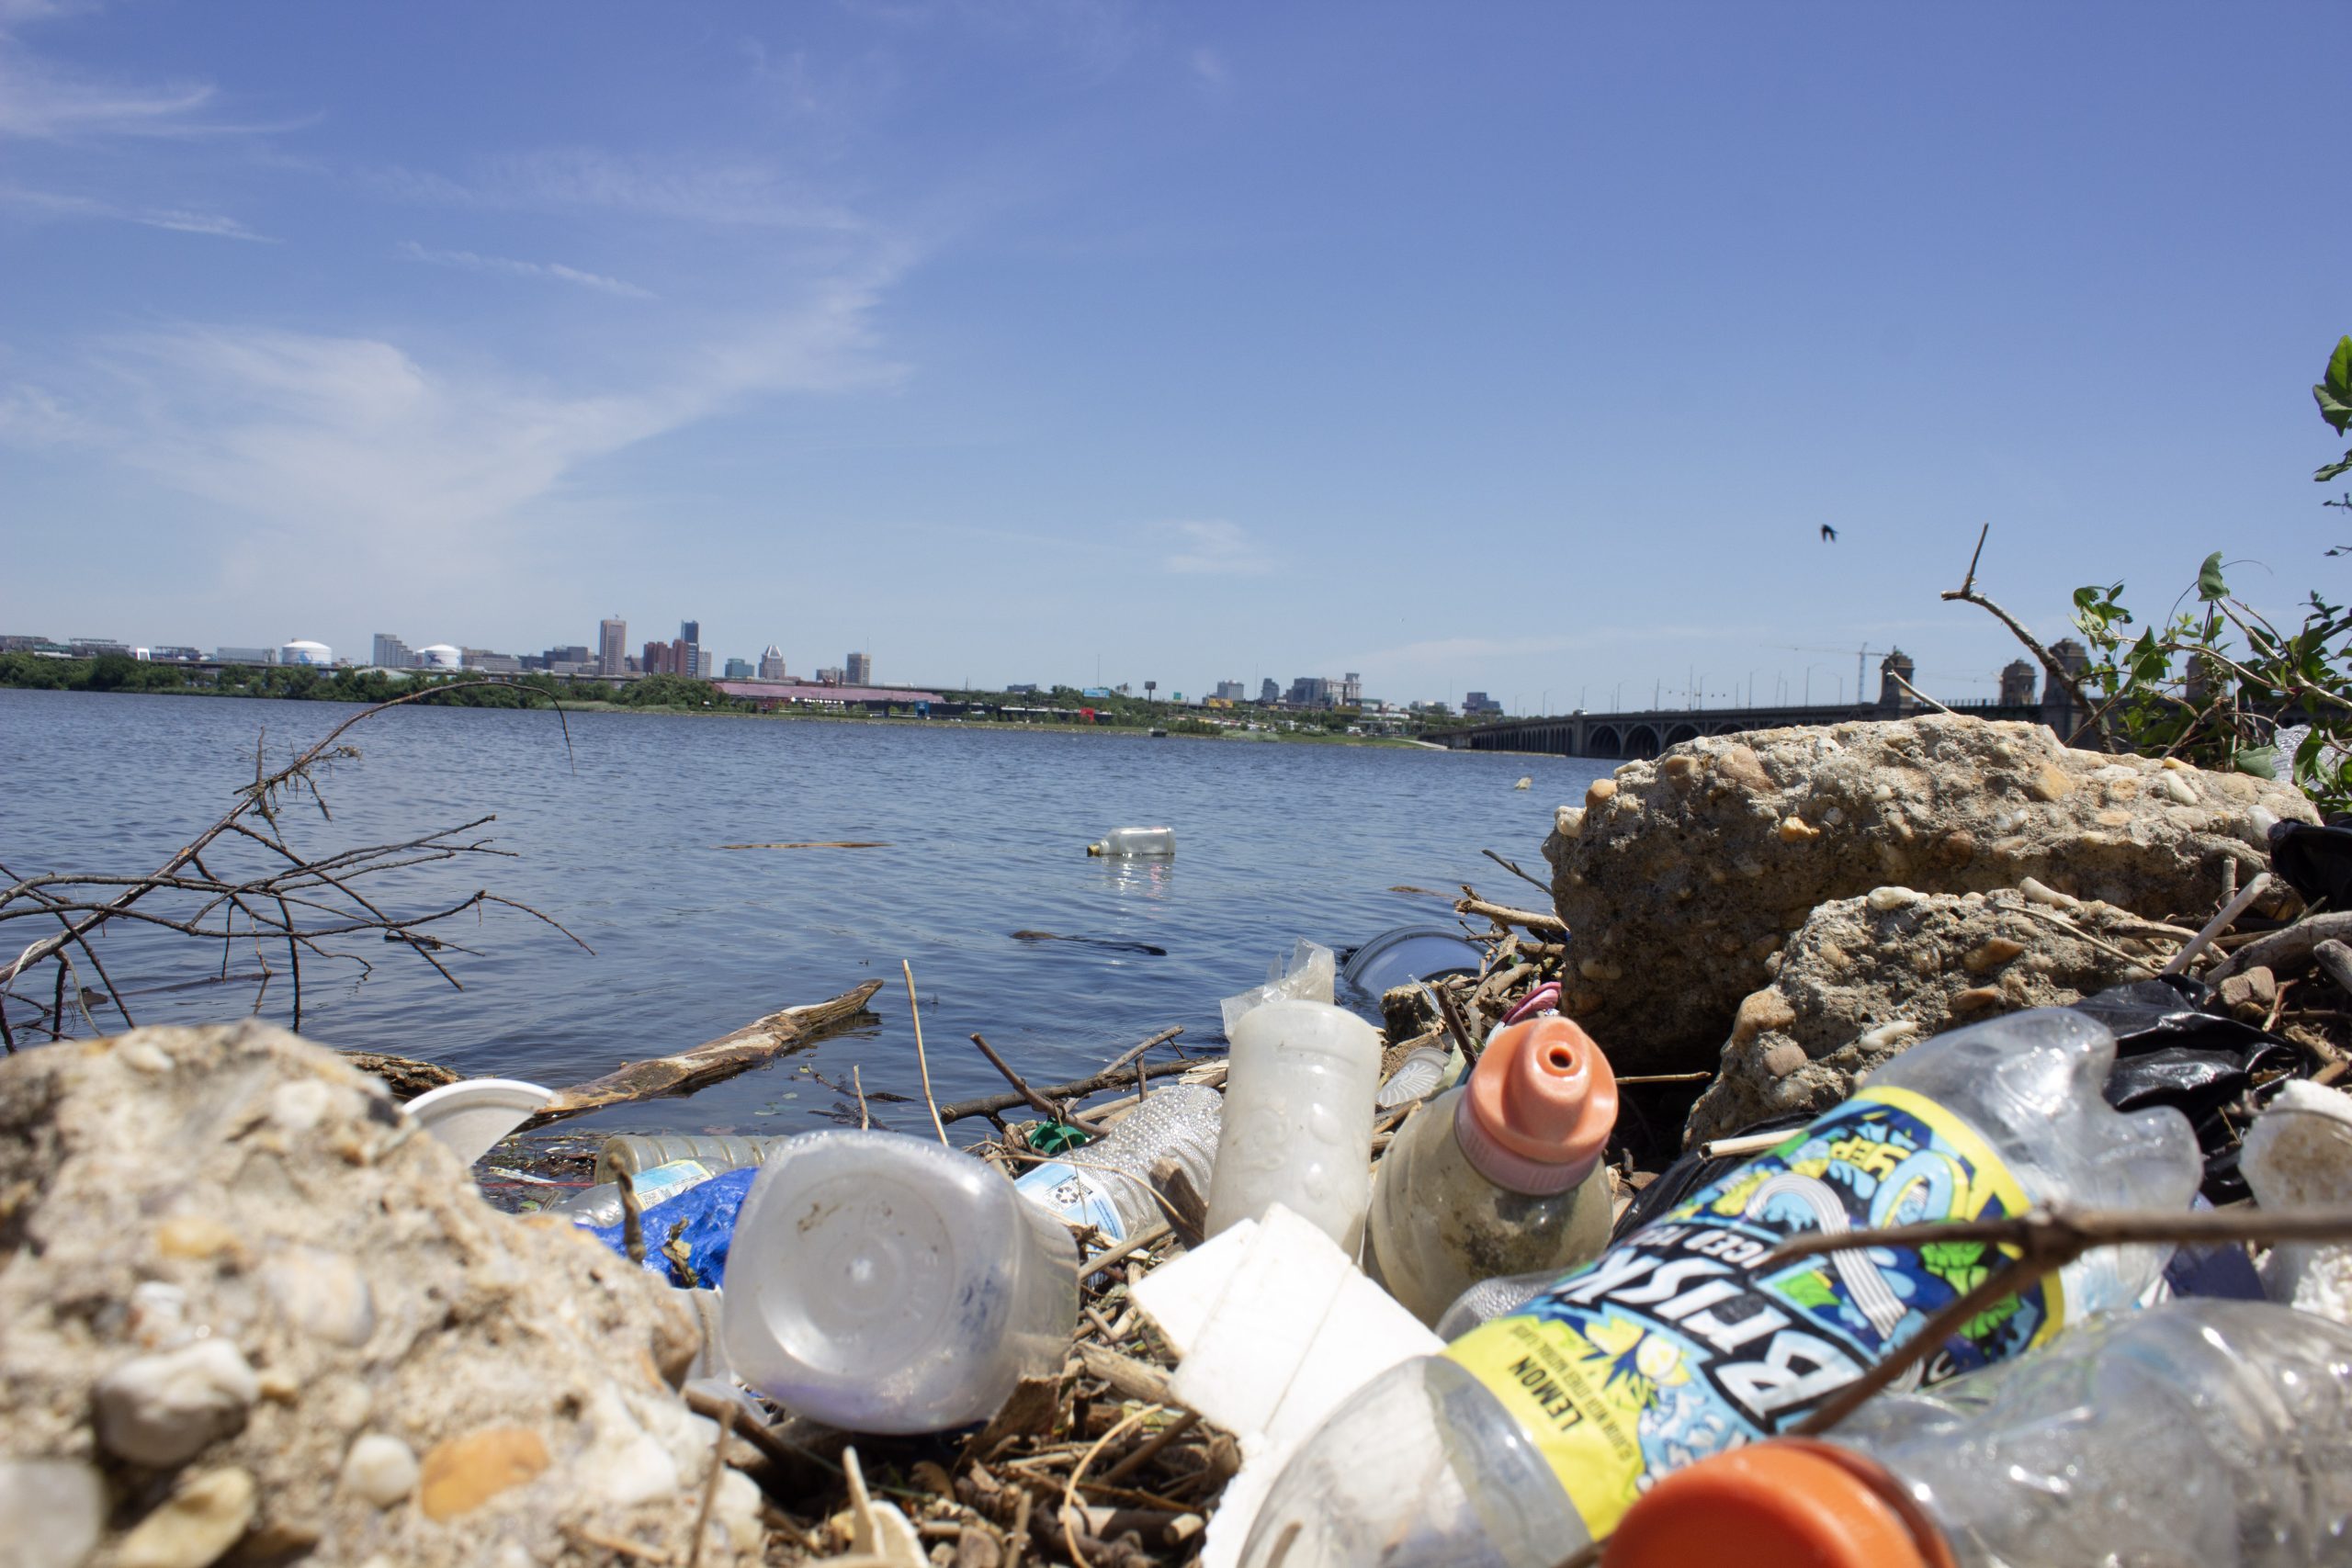 Picture of trash, mainly bottles, on the bank of a waterway.